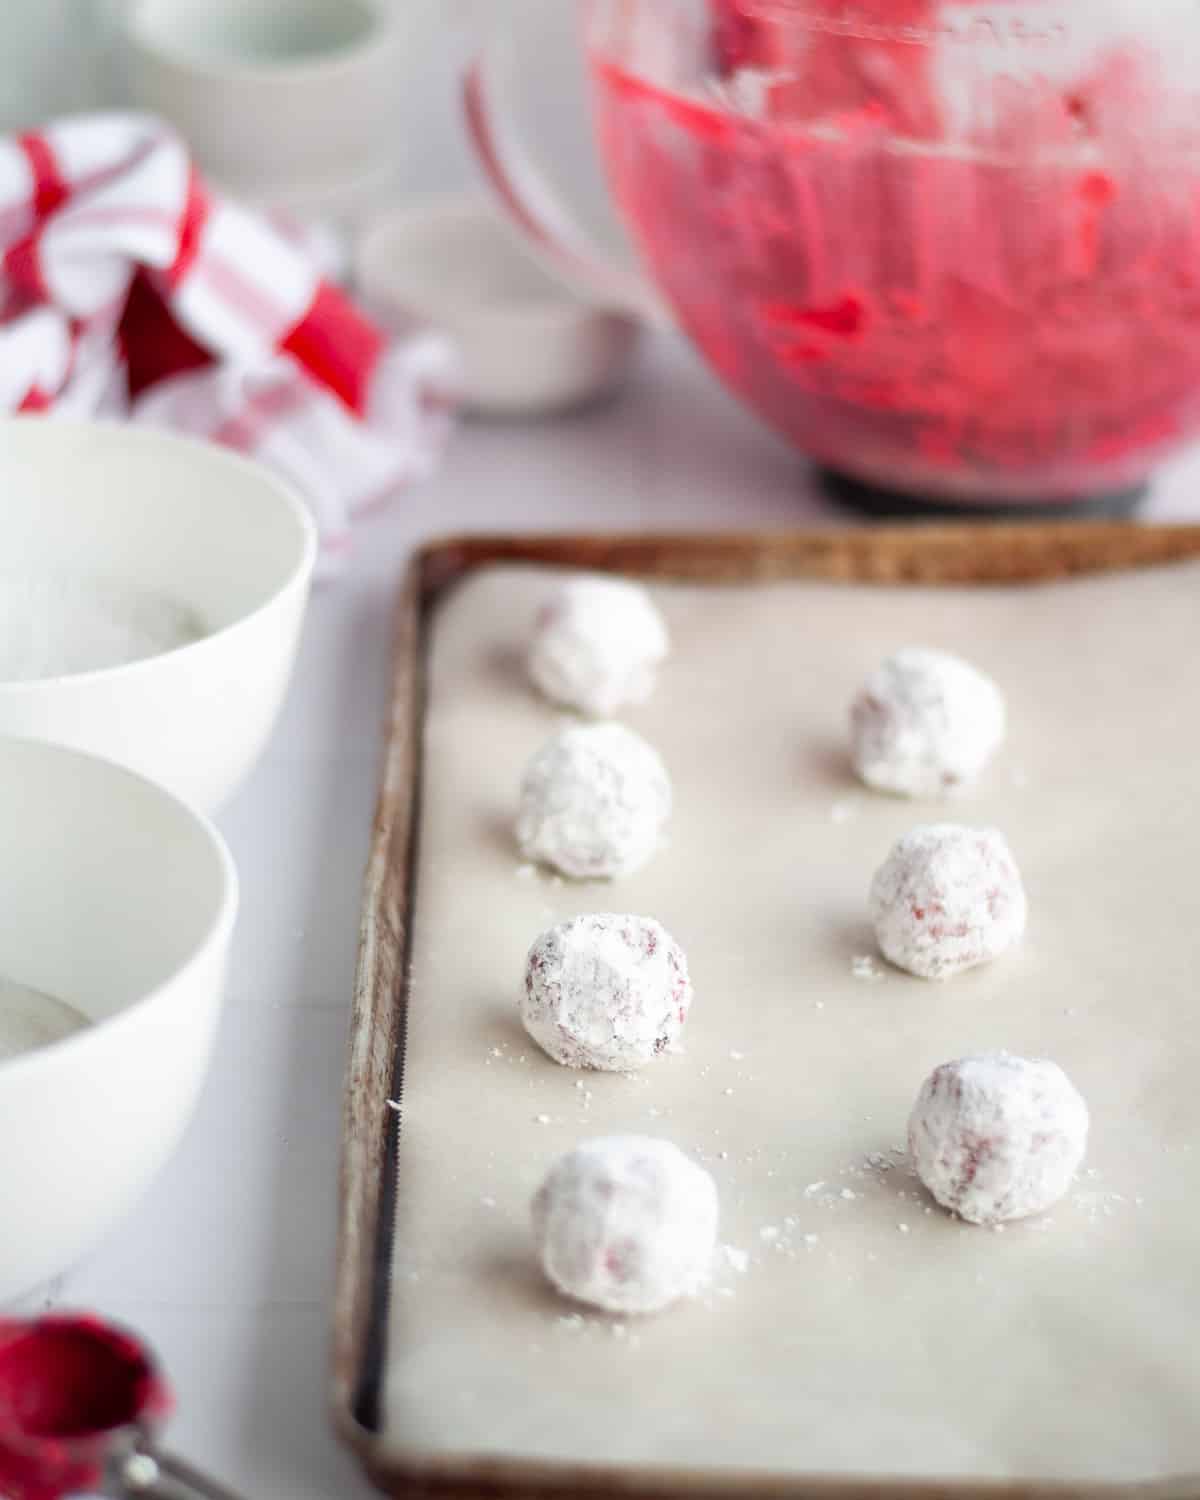 baking sheet lined with parchment paper and filled with freshly rolled chocolate cherry crinkle cookie dough balls. bowls of granulated sugar and powdered sugar peak into the picture showing what the dough balls are rolled in. the mixing bowl of bright red dough sits in the background.